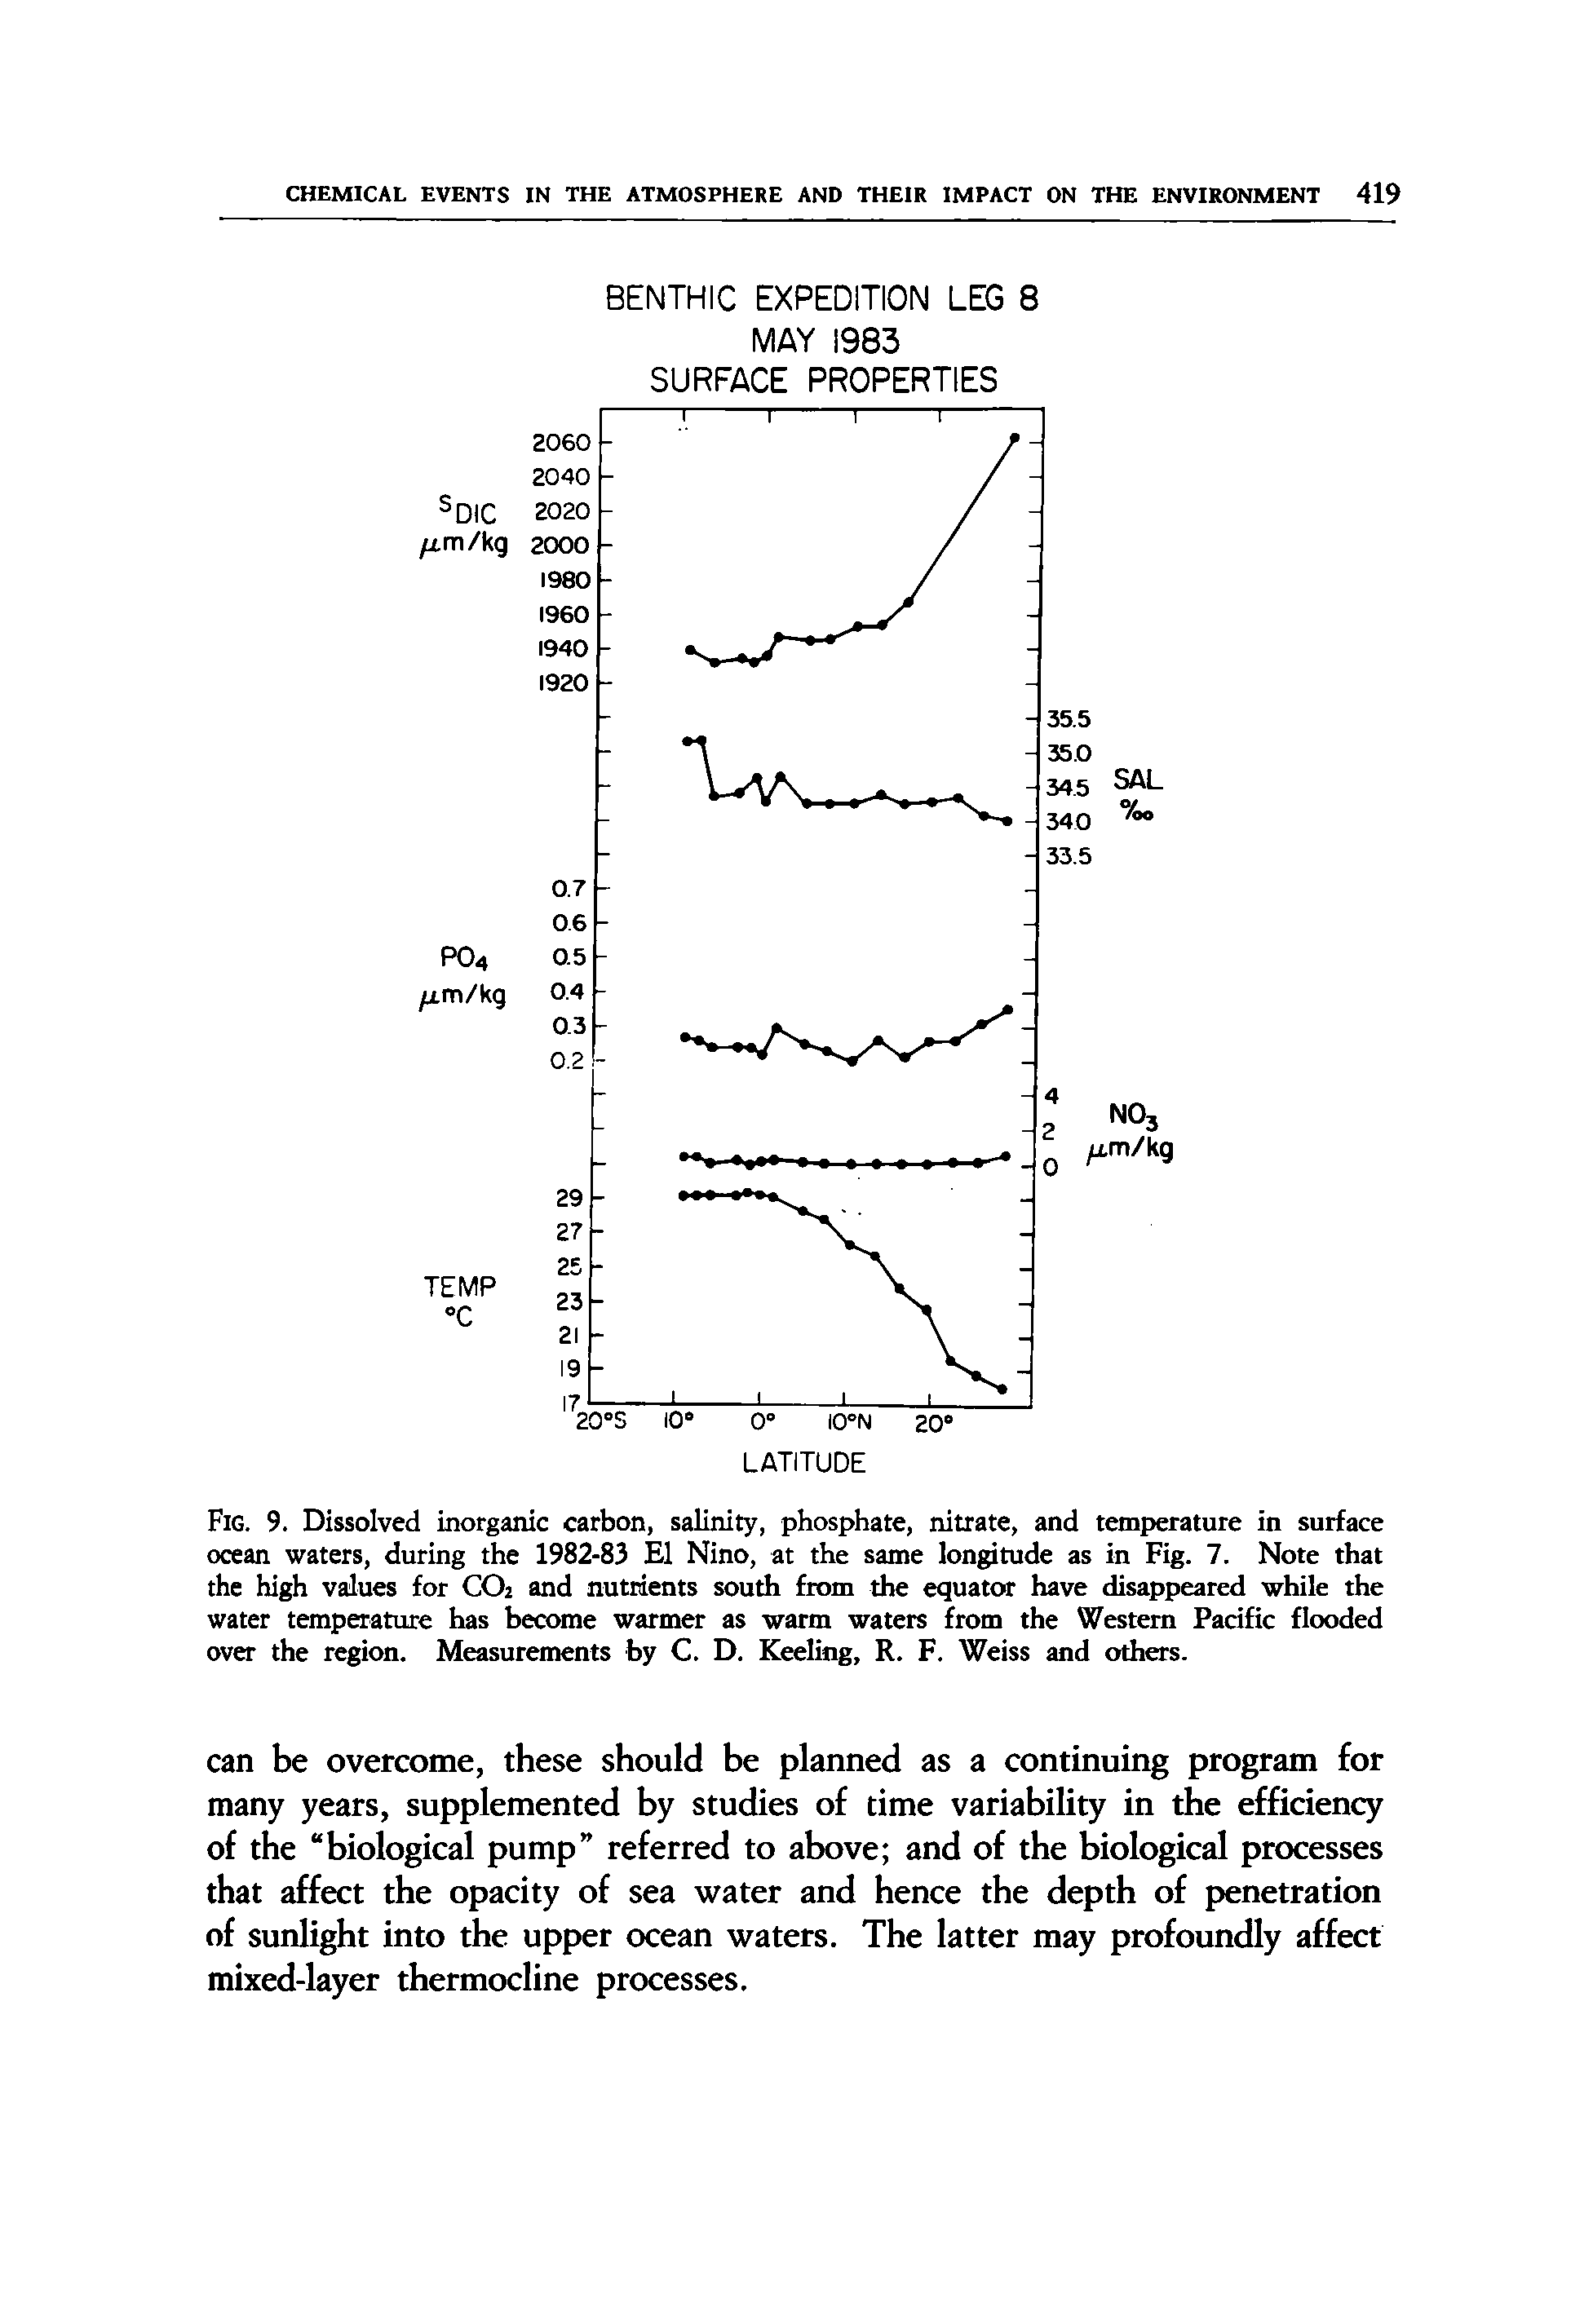 Fig. 9. Dissolved inorganic carbon, salinity, phosphate, nitrate, and temperature in surface ocean waters, during the 1982-83 El Nino, at the same longitude as in Fig. 7. Note that the high values for CO2 and nutrients south from the equator have disappeared while the water temperature has become warmer as warm waters from the Western Pacific flooded over the region. Measurements by C. D. Keeling, R. F. Weiss and others.